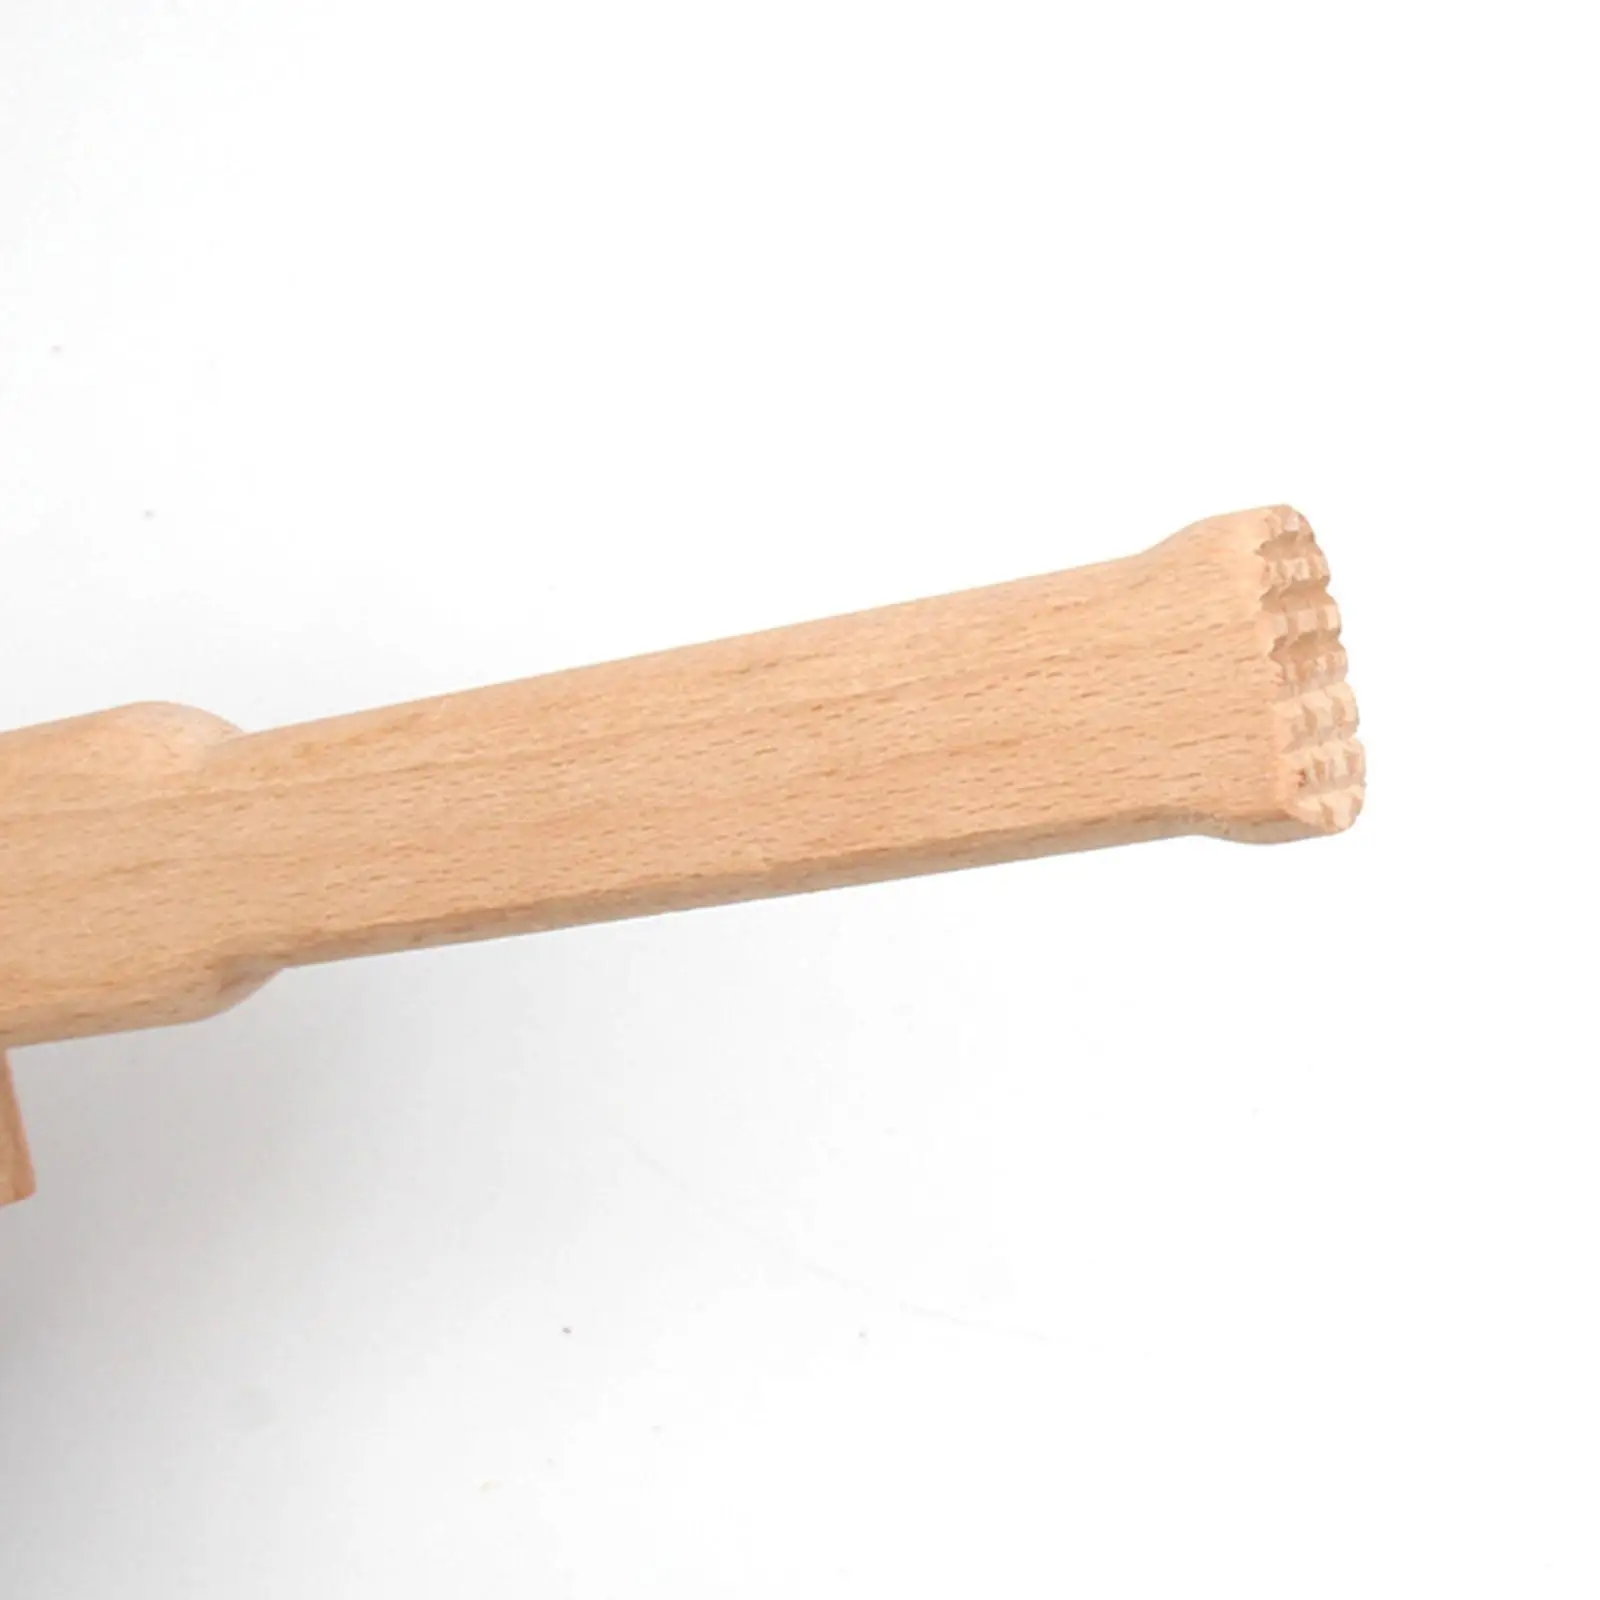 Wooden Mallet with Handle Woodworking Mallet Solid Beech Smooth Surface Premium Woodworking Hand Tool Manual Hammer Wood Hammer